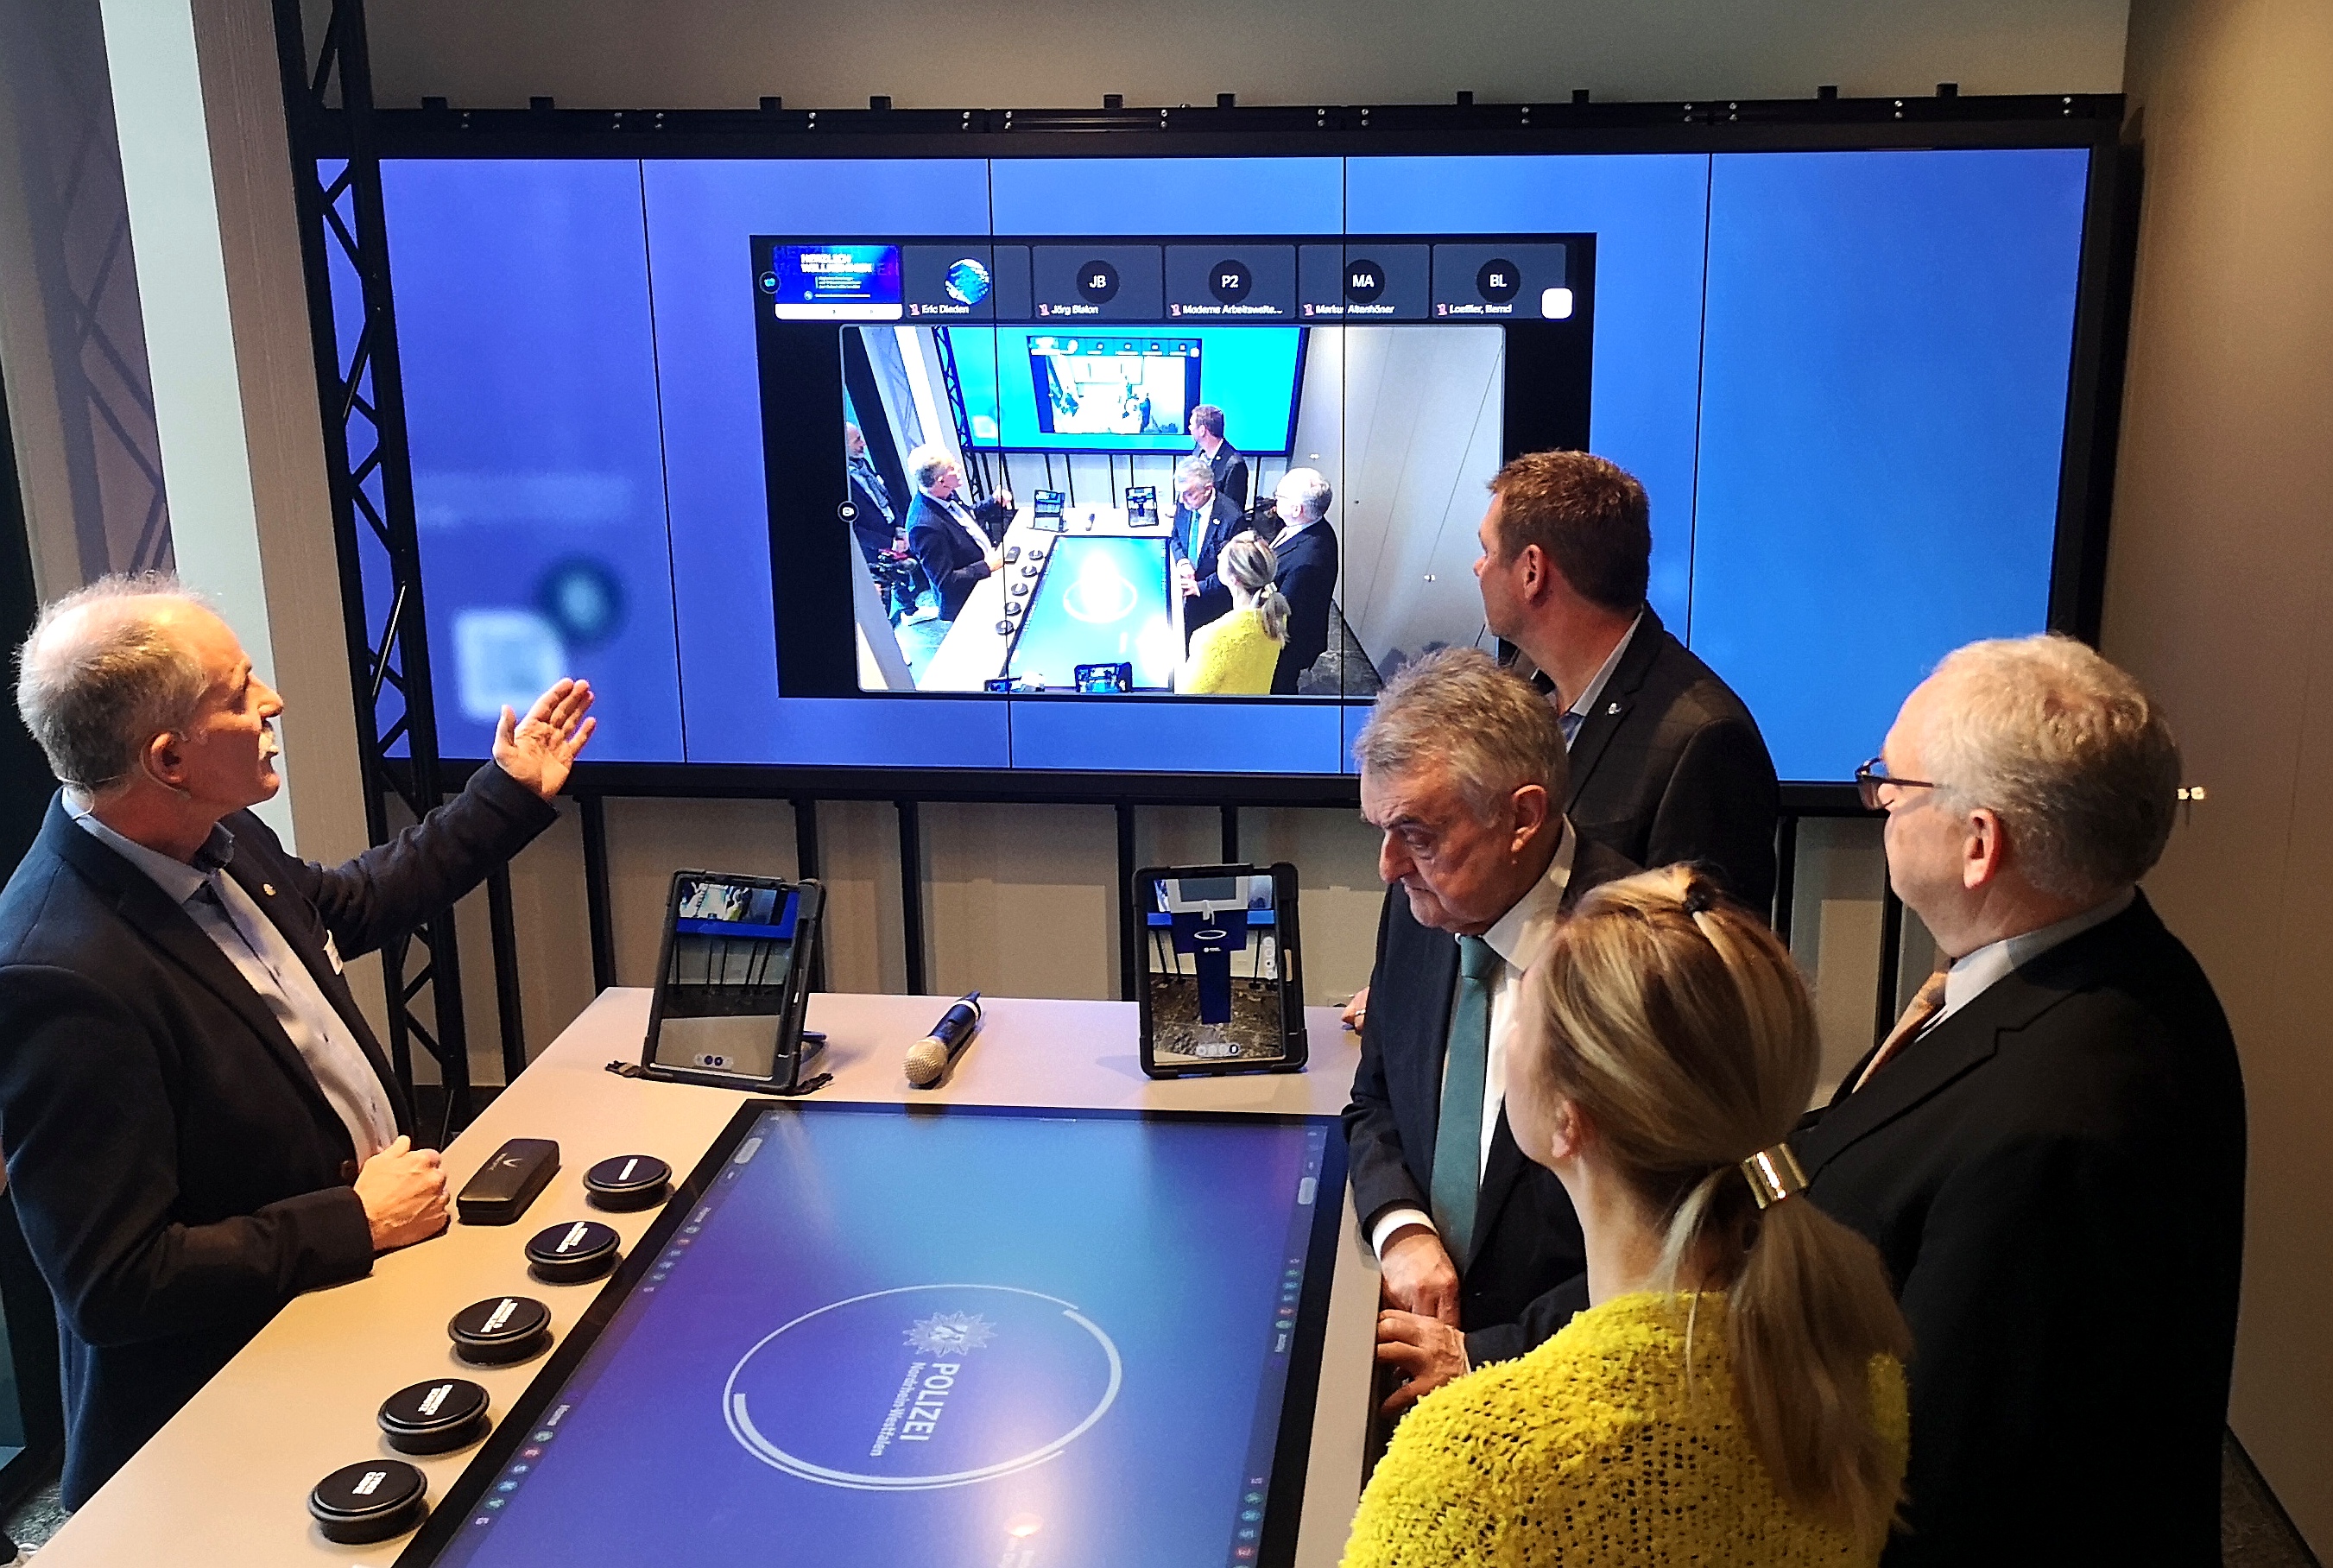 Interior Minister Herbert Reul, State Secretary Dr. Daniela Lesmeister, Cologne Police President Johannes Hermanns and Ingo Wünsch, Director of the North Rhine-Westphalia State Office of Criminal Investigation, at the opening of the first NRW Police Digital Advice and Prevention Centre in Cologne.